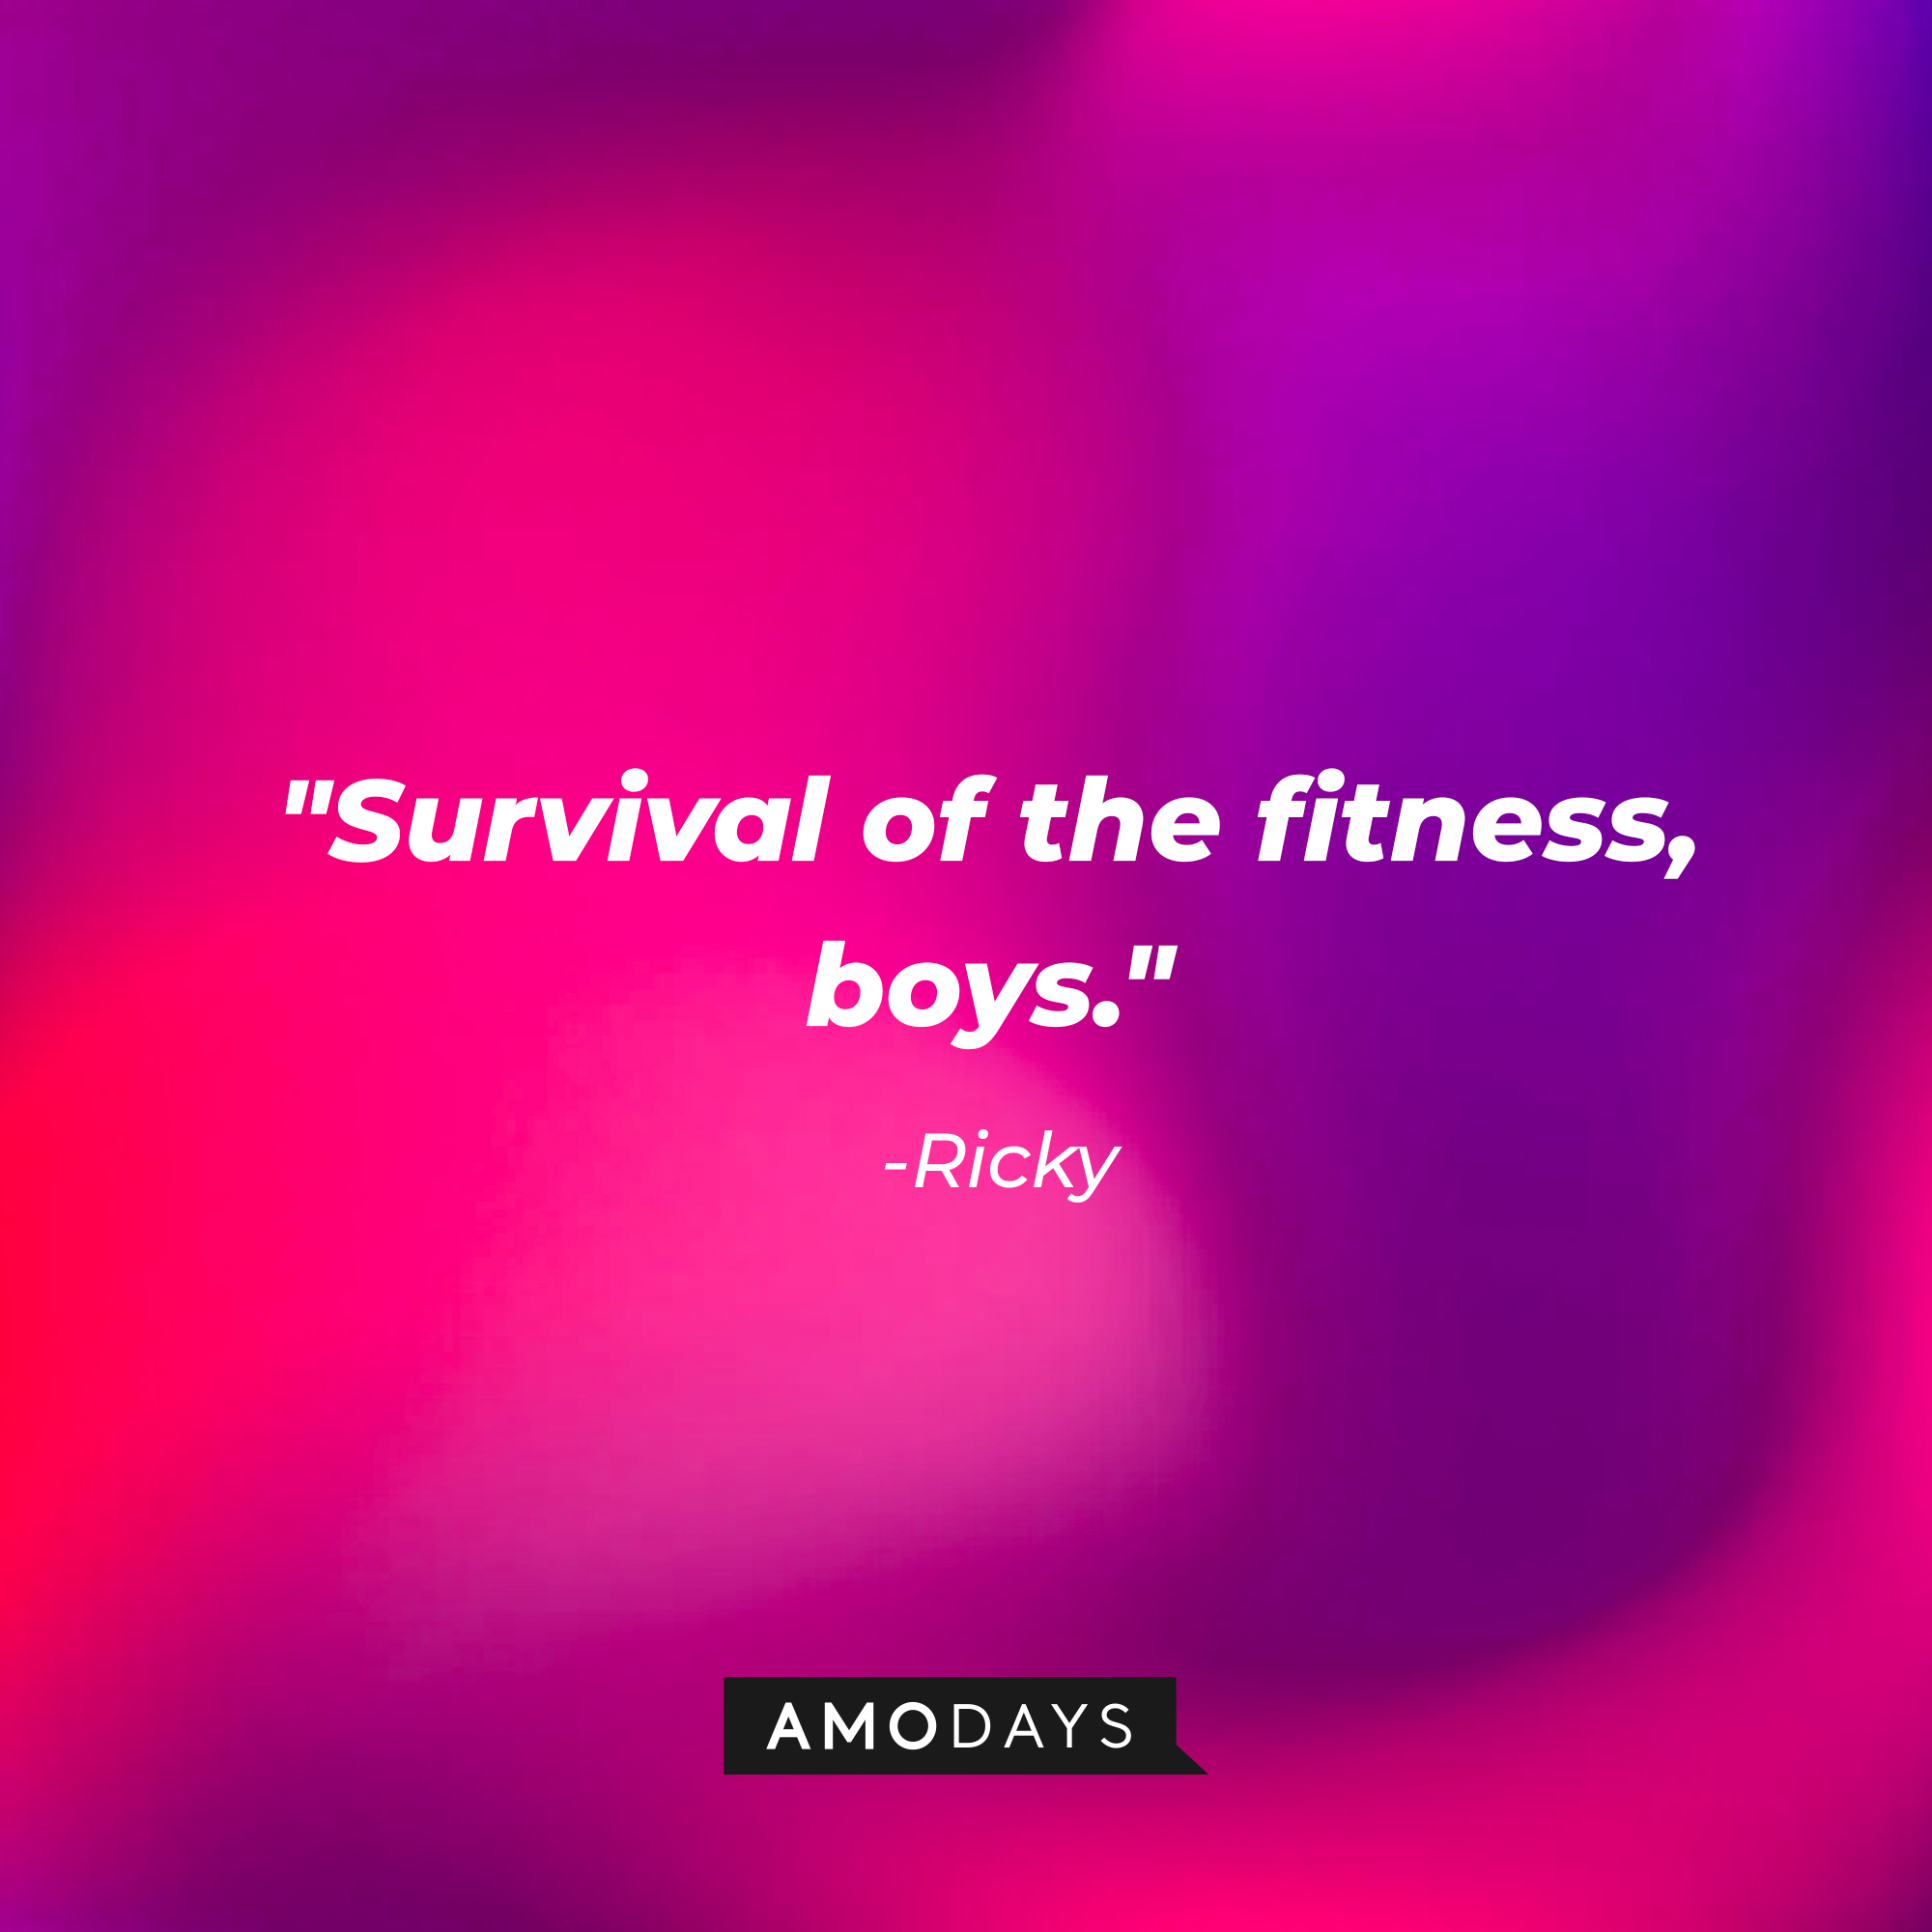 Ricky's quote, "Survival of the fitness, boys." | Source: AmoDays